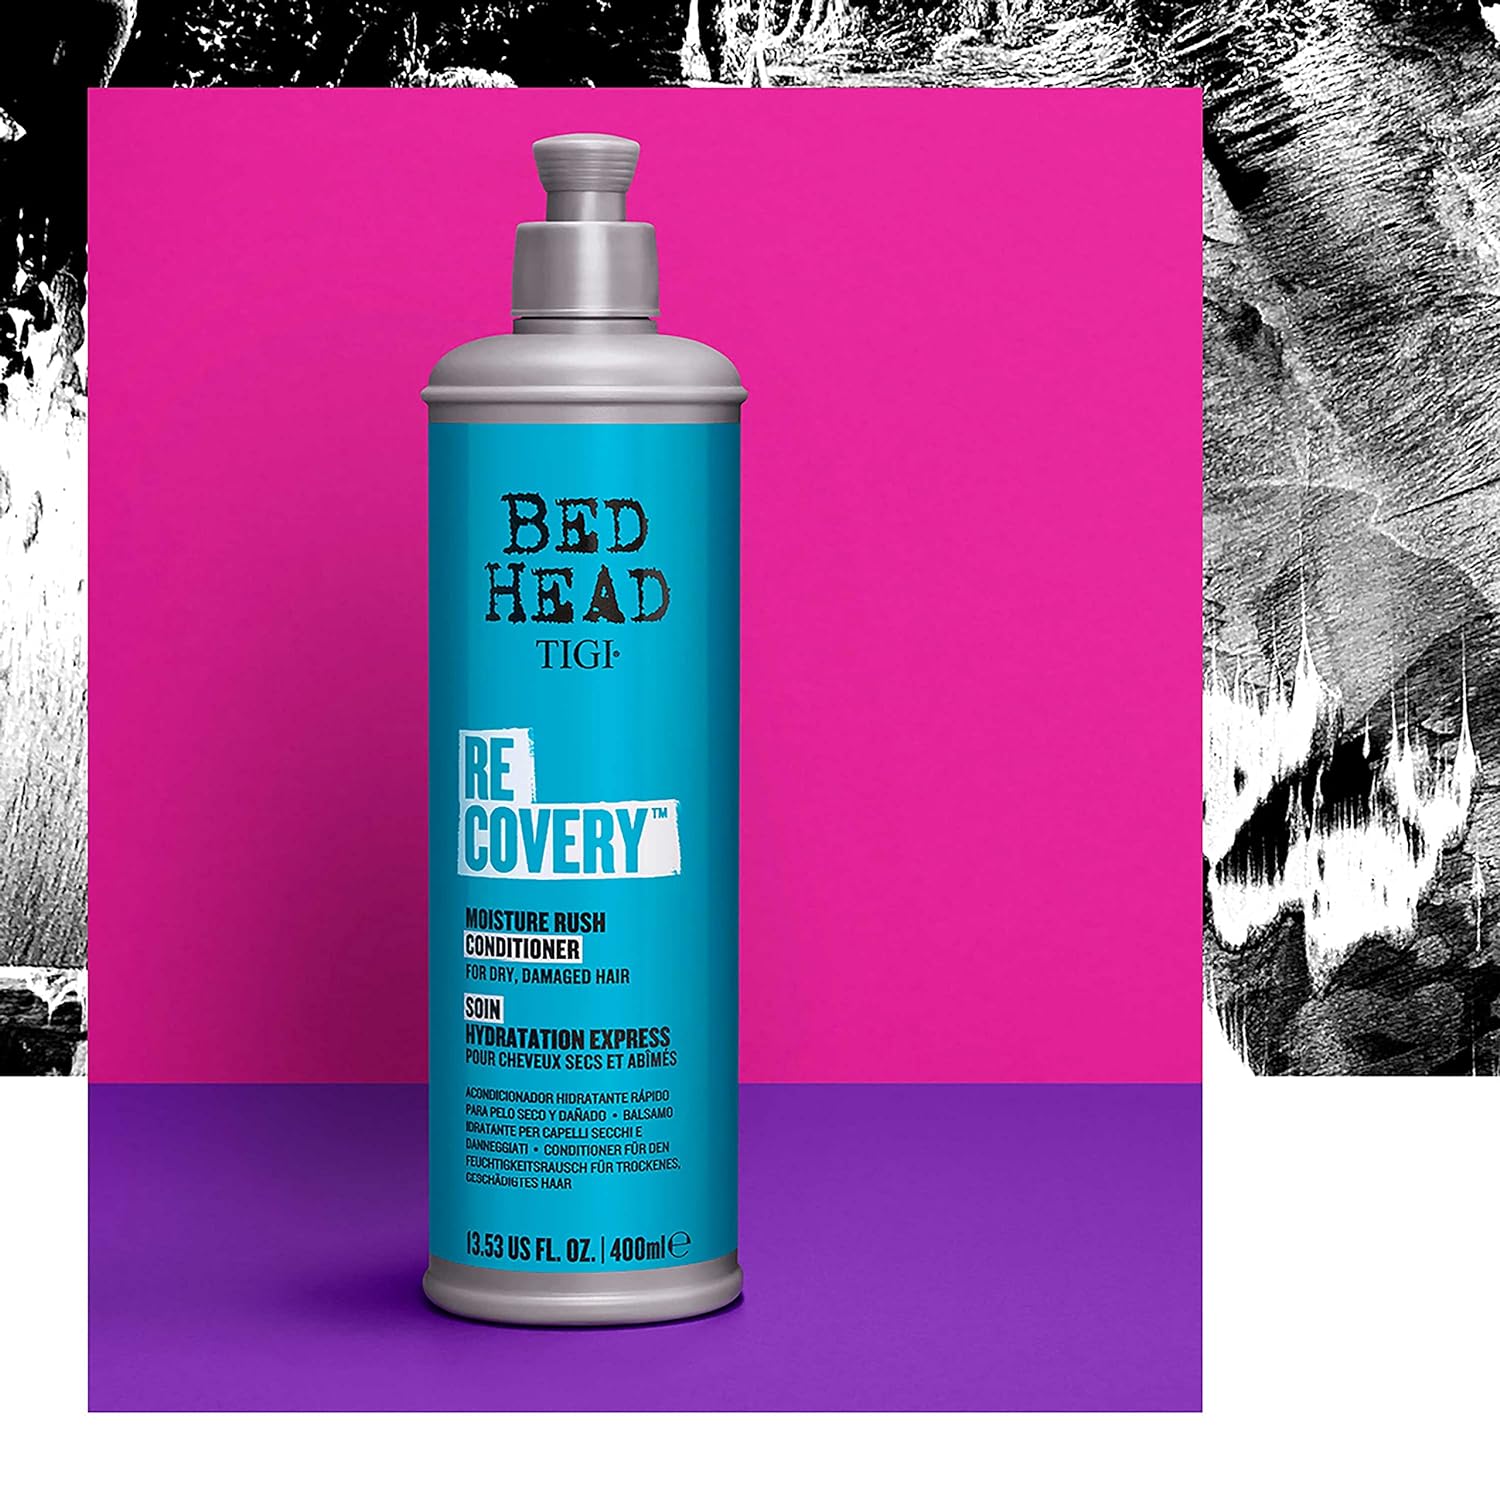 TIGI BED HEAD RECOVERYTM MOISTURIZING CONDITIONER FOR DRY HAIR 20.29 fl oz : Beauty & Personal Care